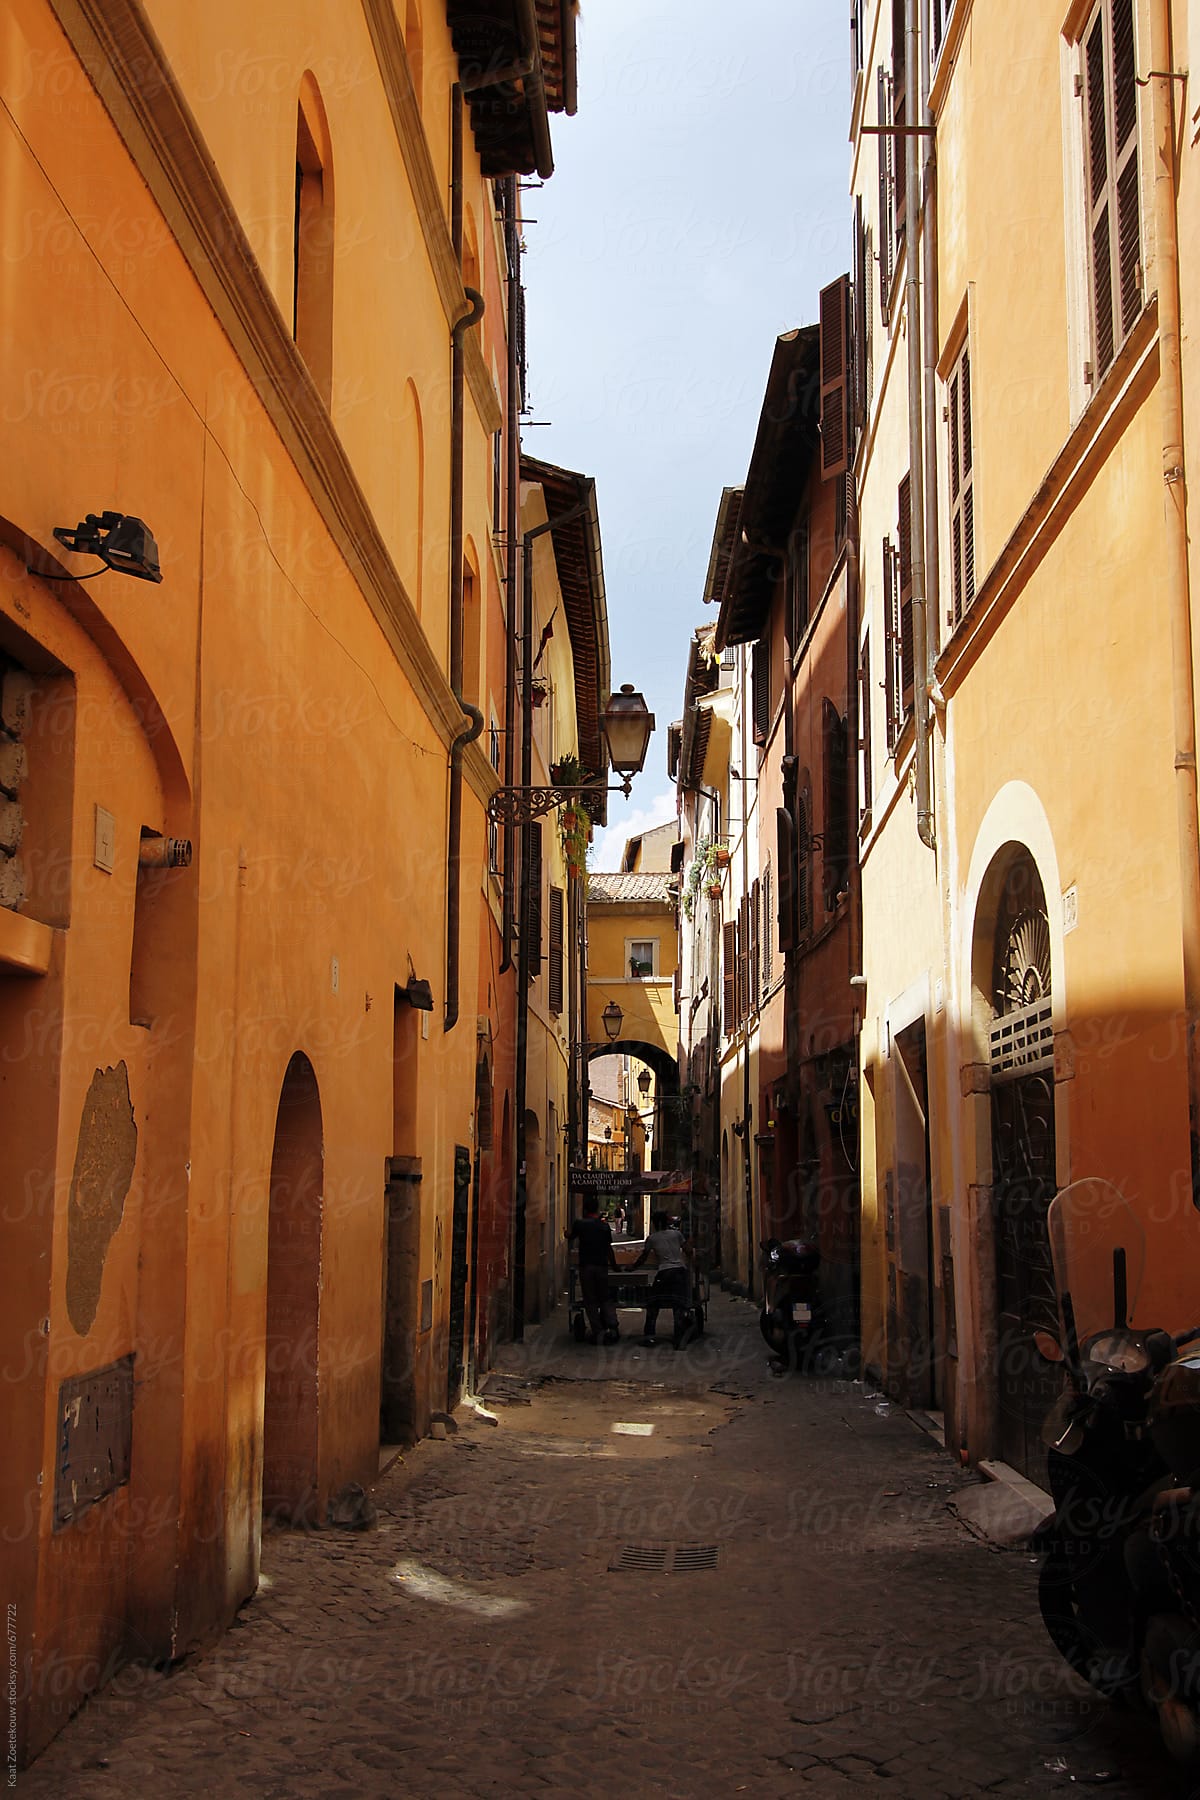 Sunlit back alley in Rome, Italy